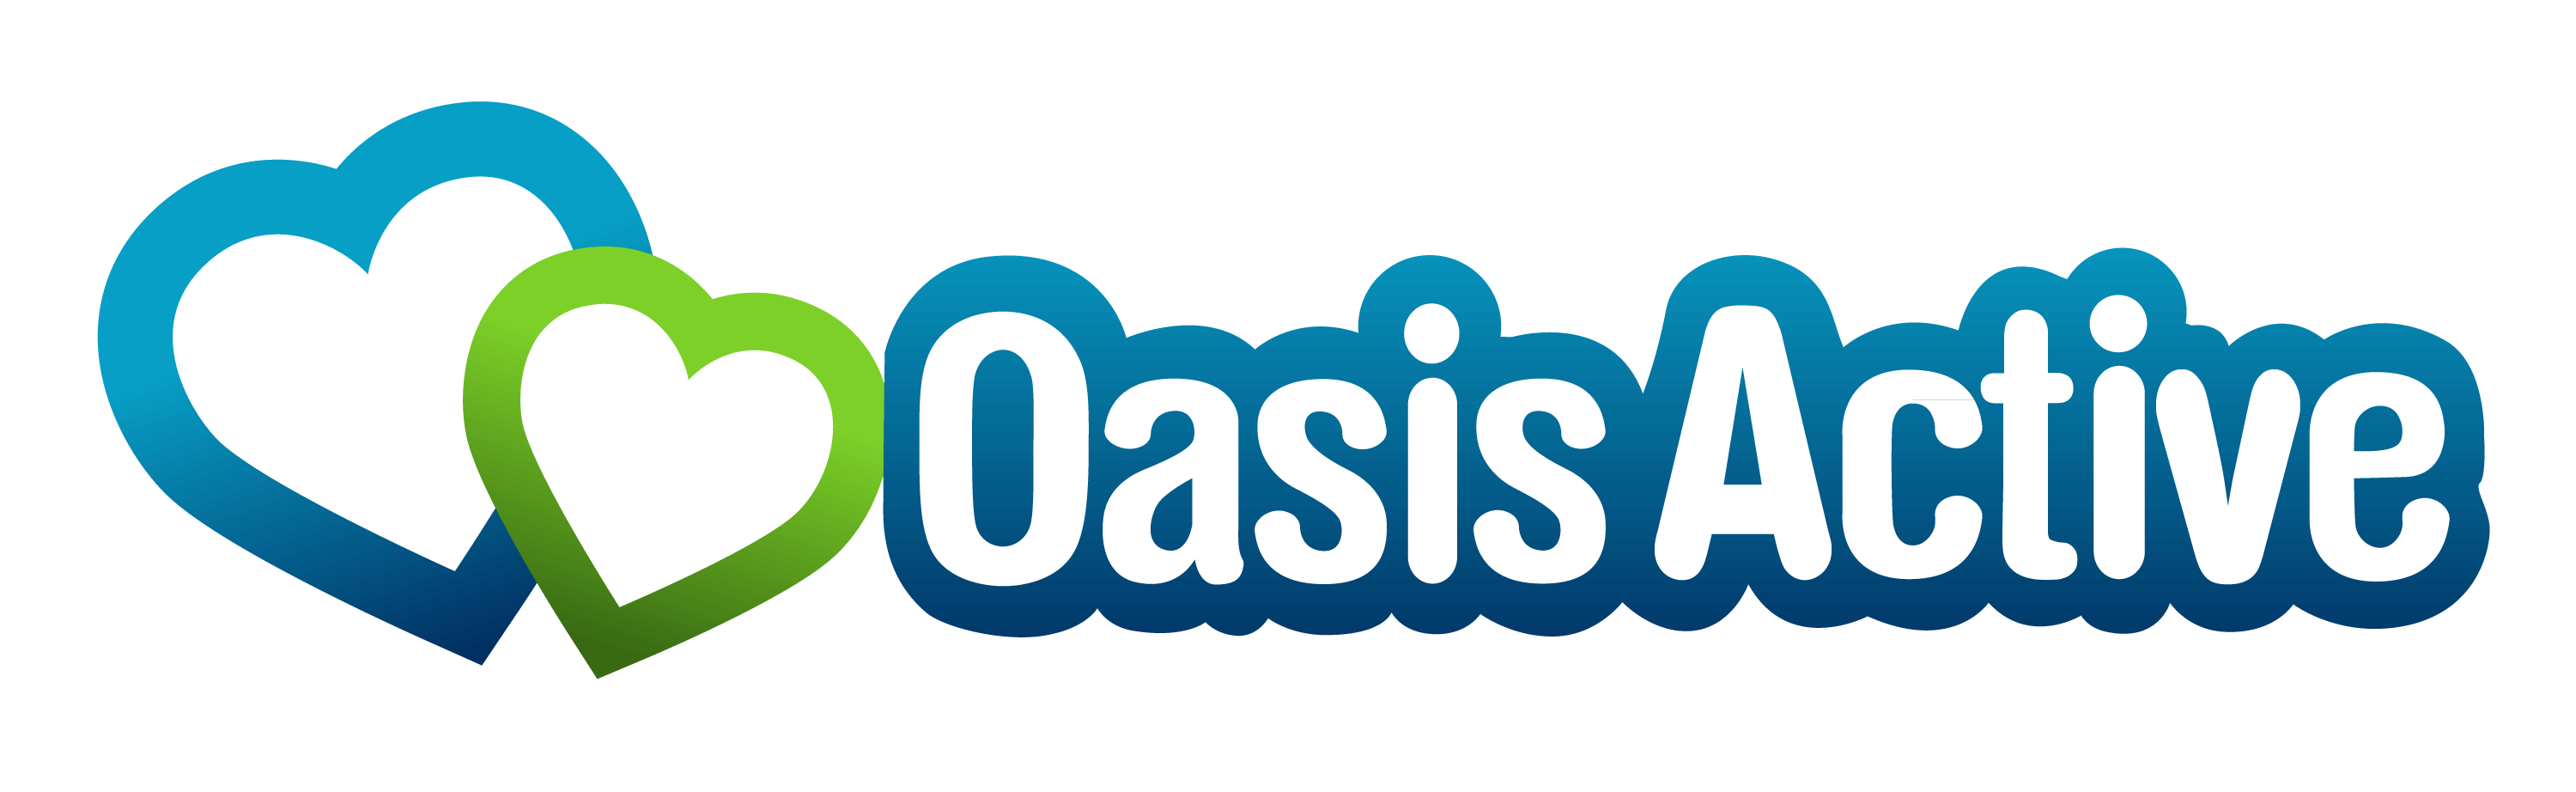 oasis dating site nsw)